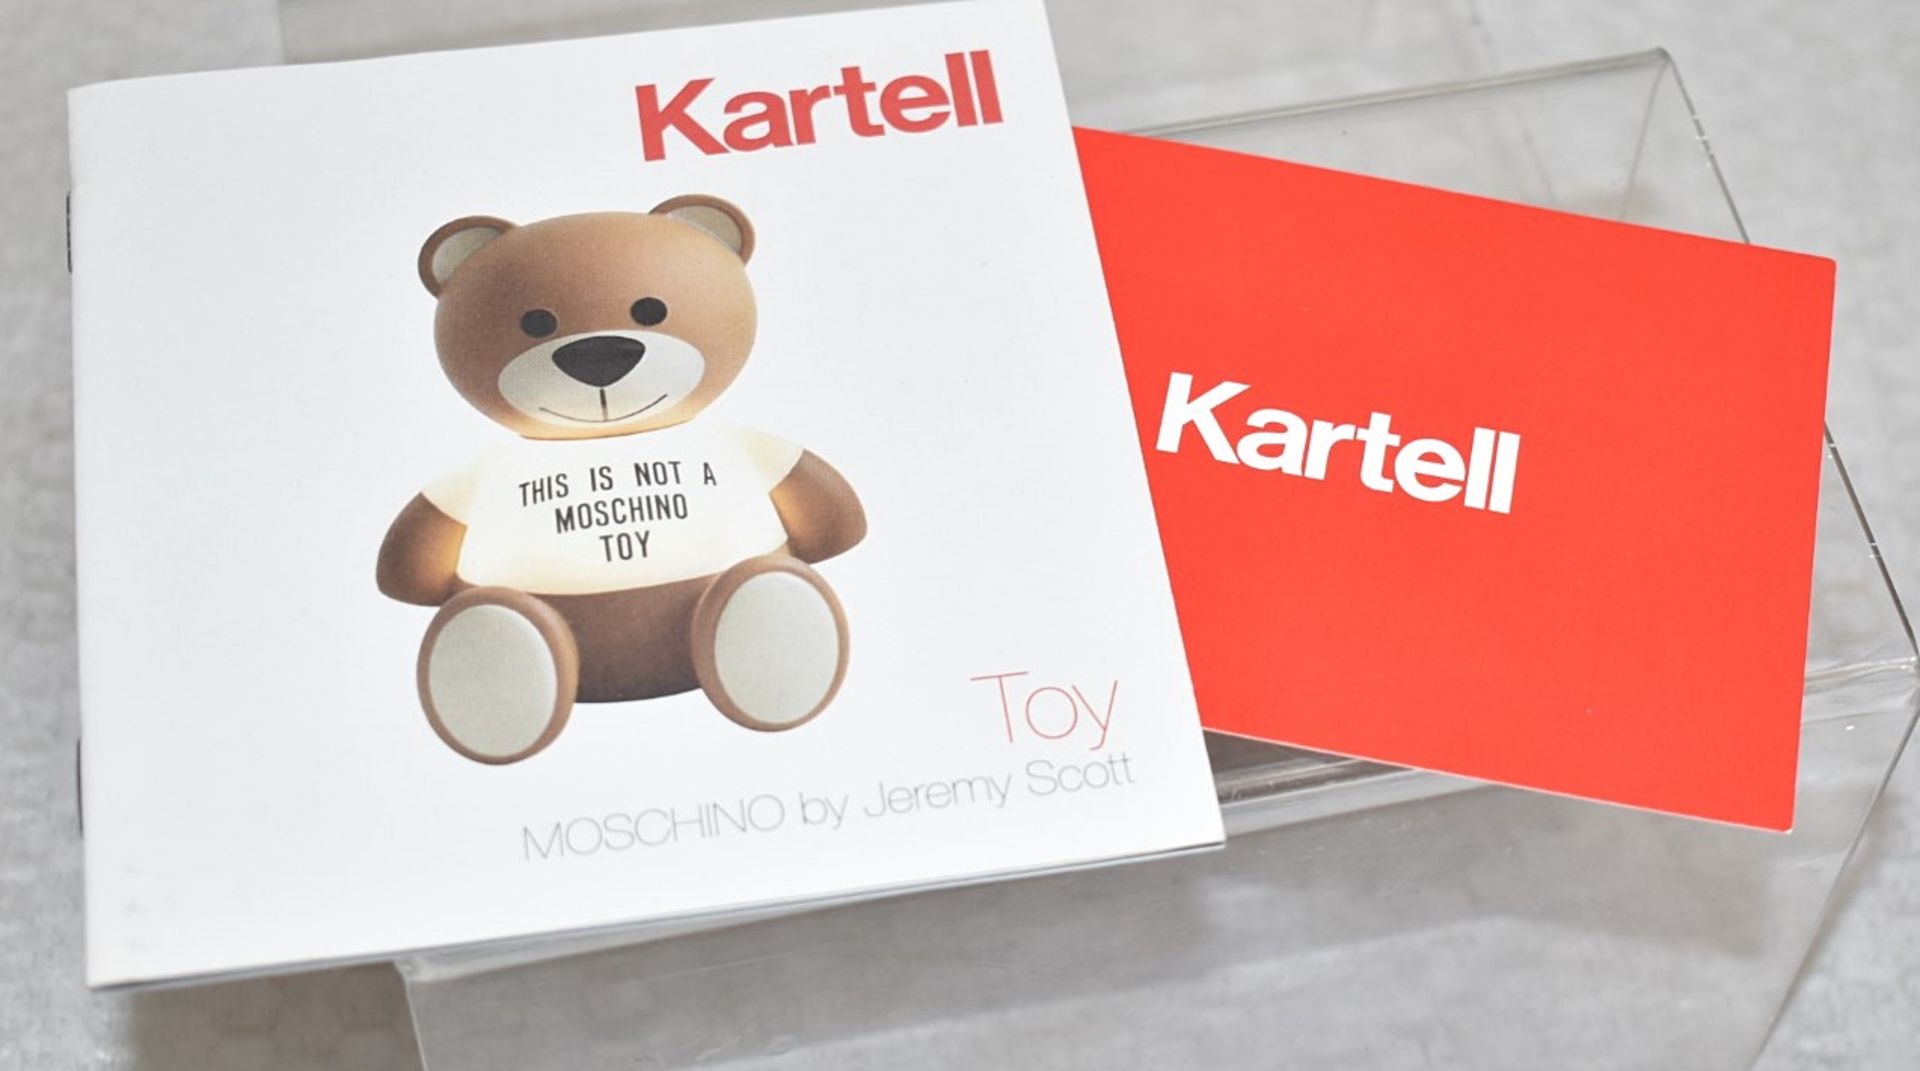 1 x KARTELL Moschino 'NOT A TOY' Designer Bear Table Lamp Light - Unused / Boxed - RRP £238.00 - Image 11 of 13